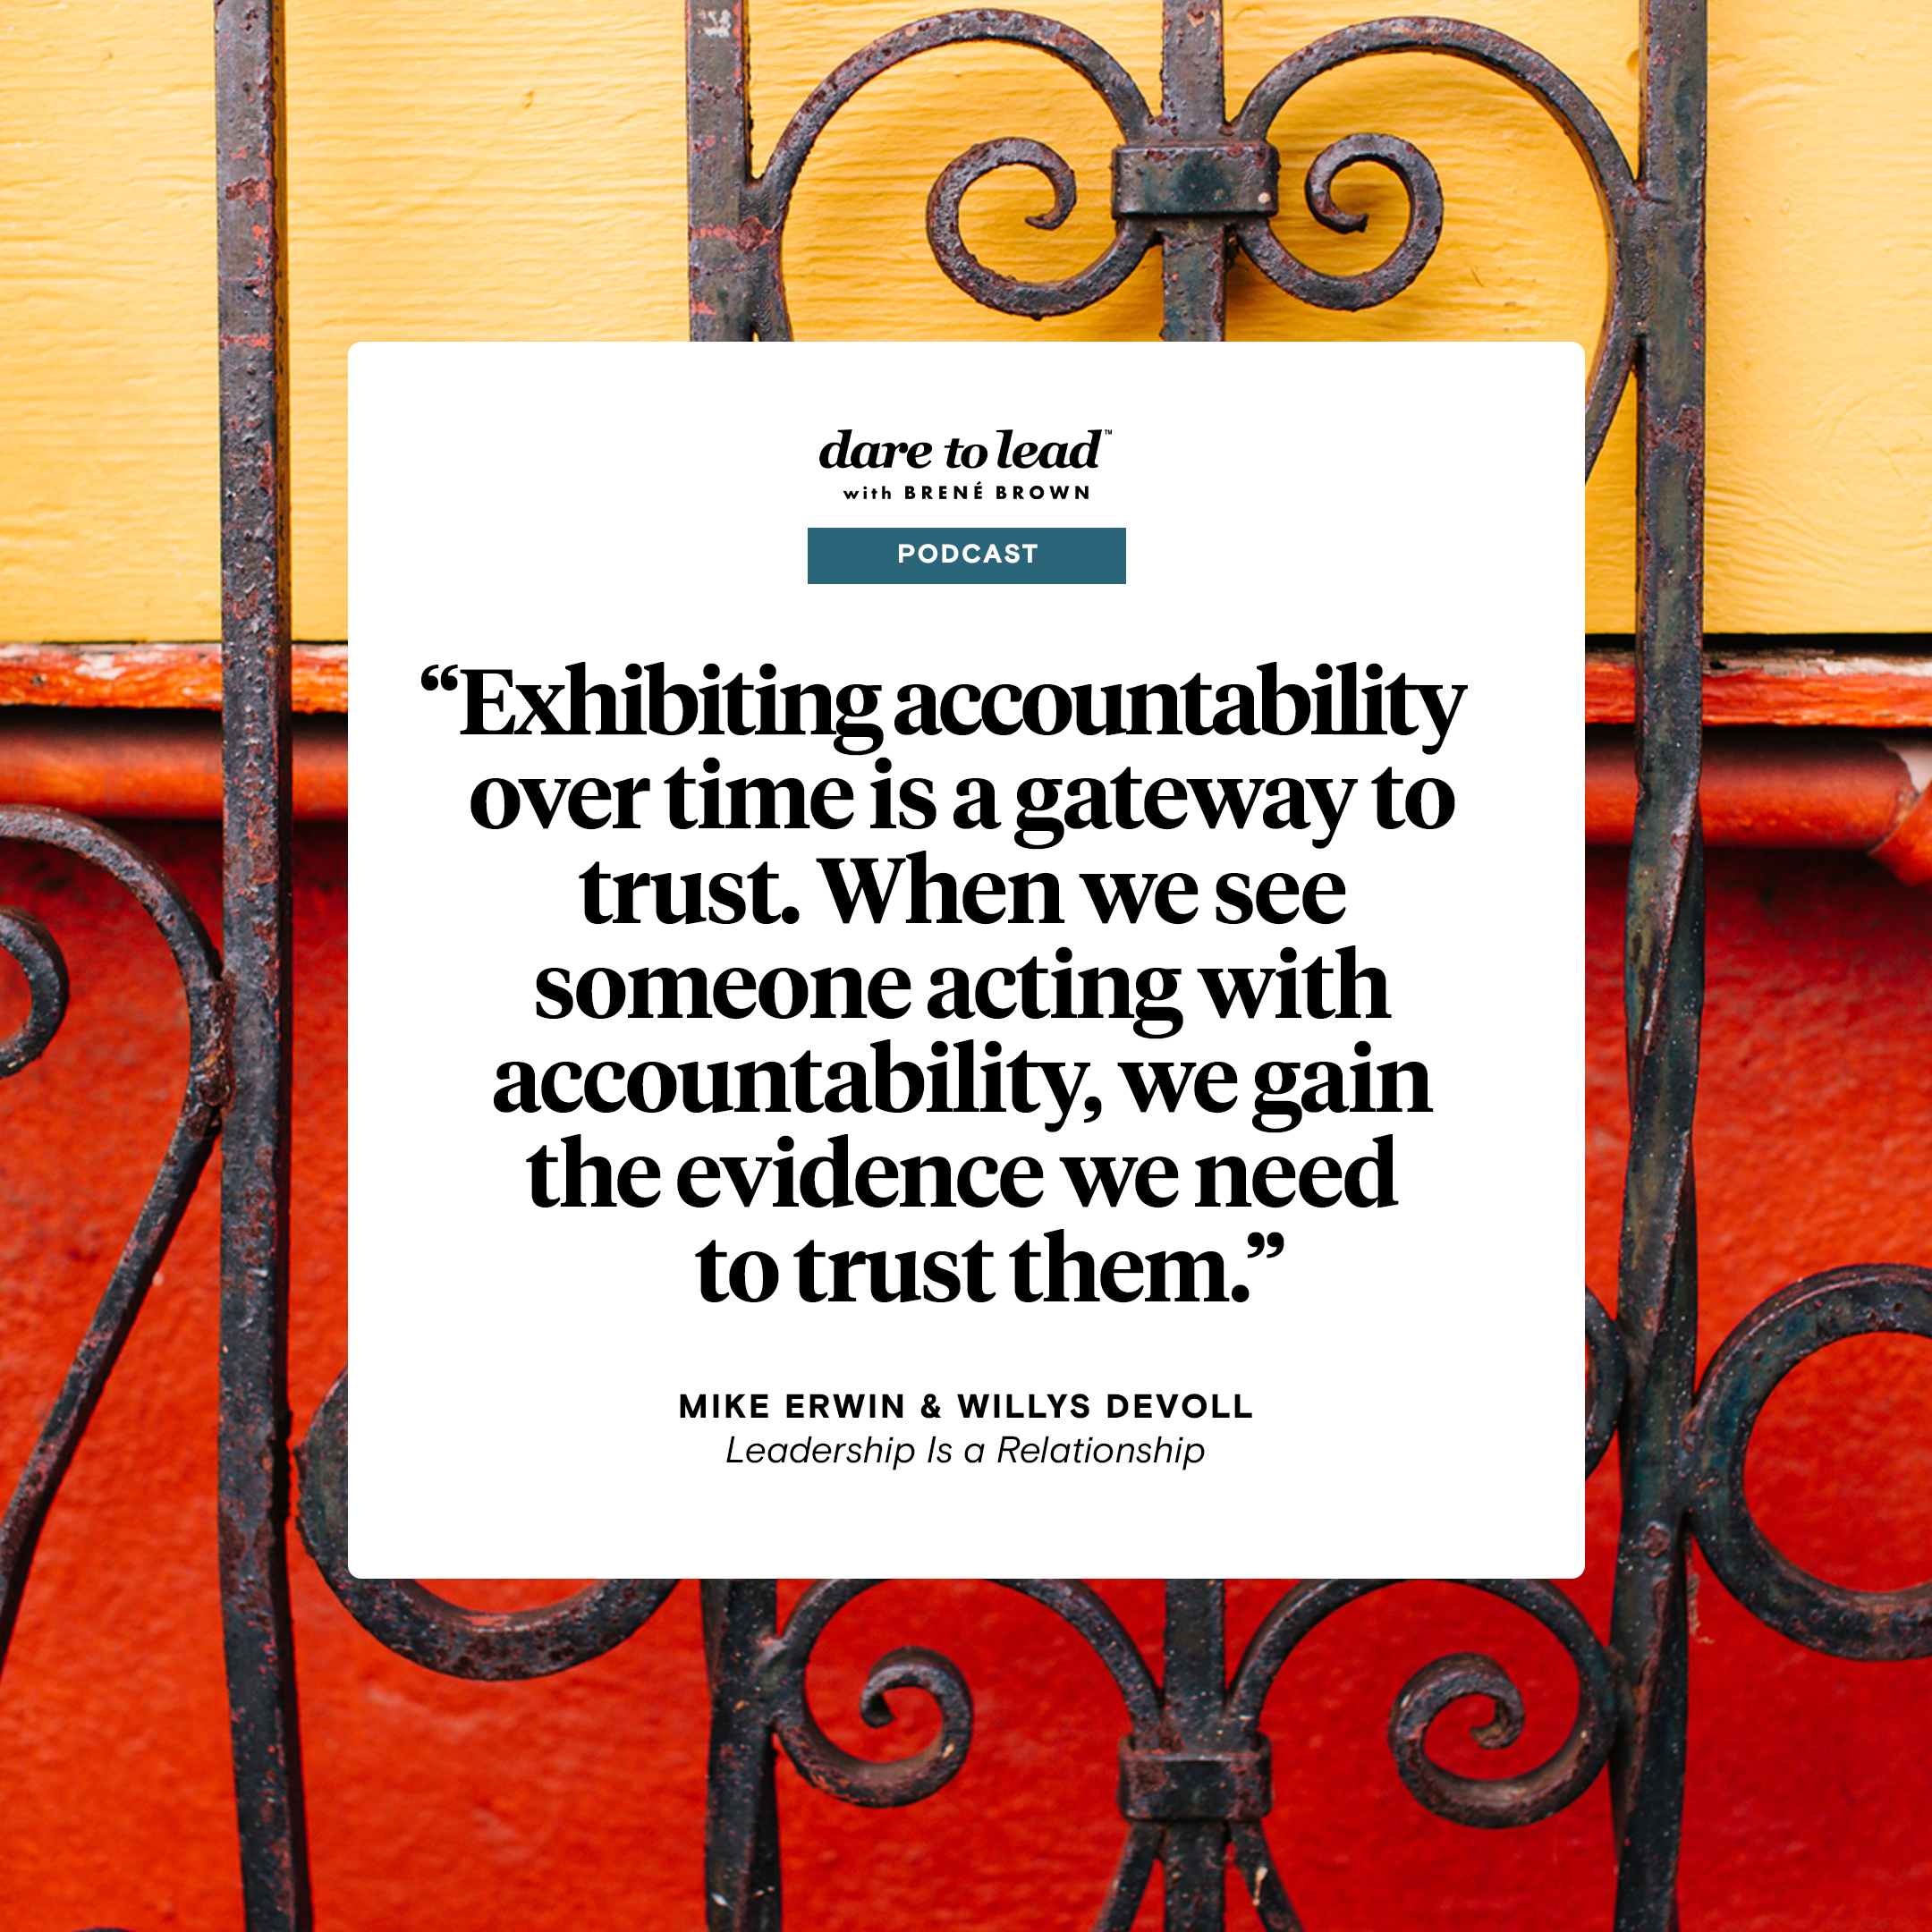 A quote from Mike Erwin and Willys DeVoll, authors of Leadership Is a Relationship: Exhibiting accountability over time is a gateway to trust. When we see someone acting with accountability, we gain the evidence we need to trust them.